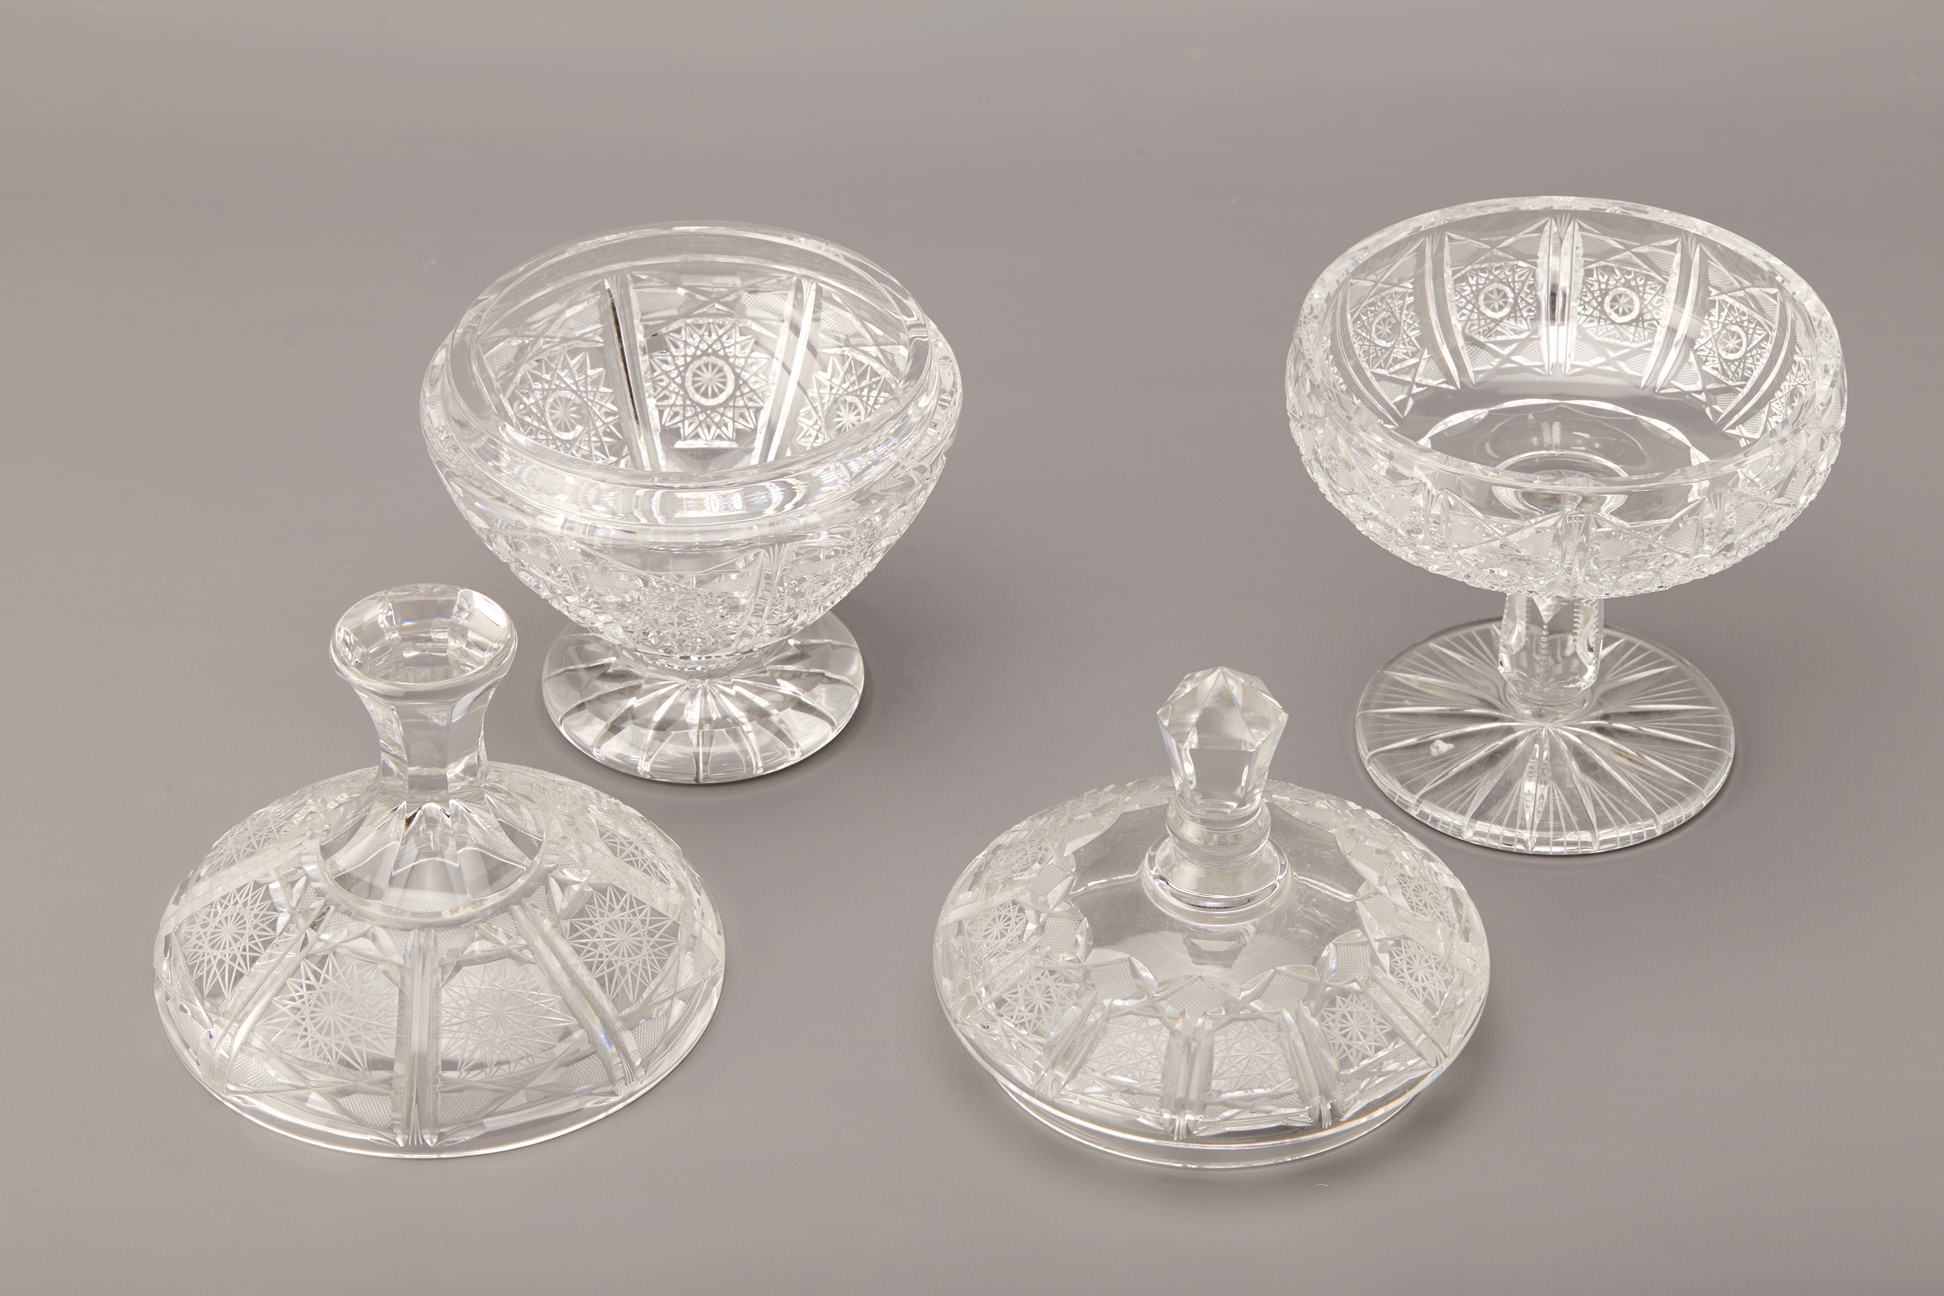 TWO BOHEMIA CRYSTAL COVERED BONBON DISHES - Image 2 of 2